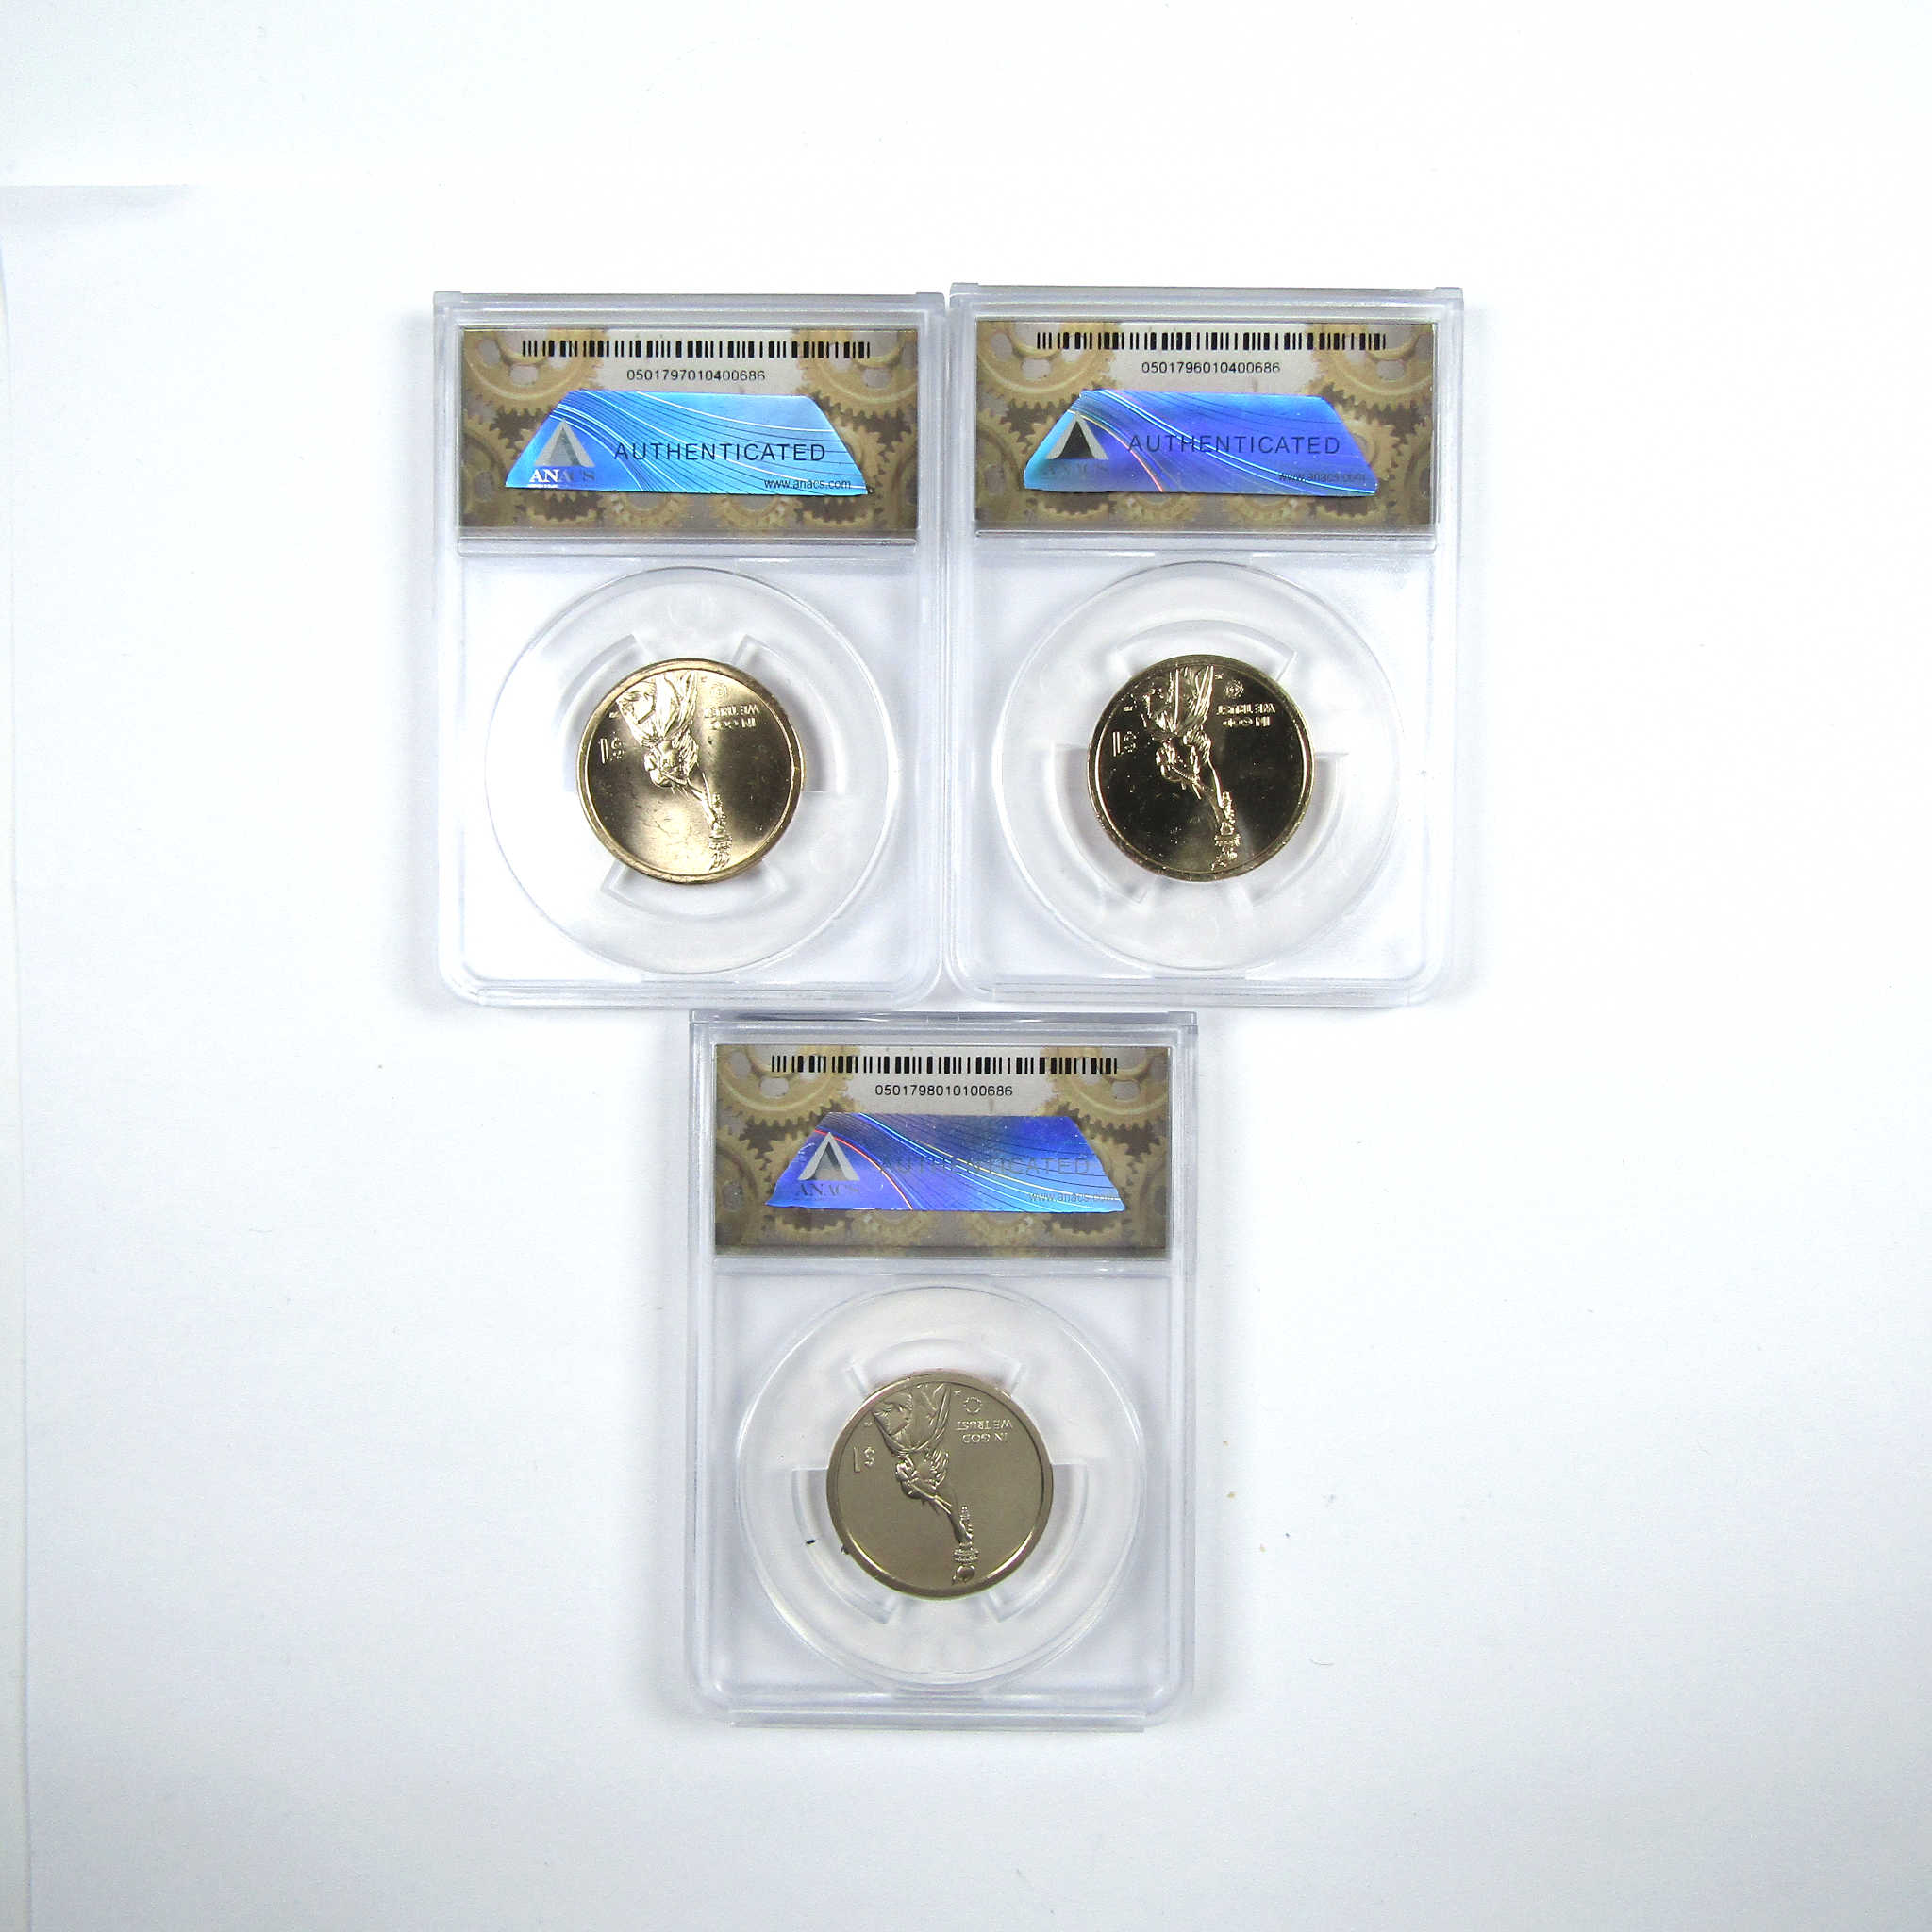 2019 PDS Classifying the Stars Innovation 3 Coin Set ANACS SKU:CPC6117